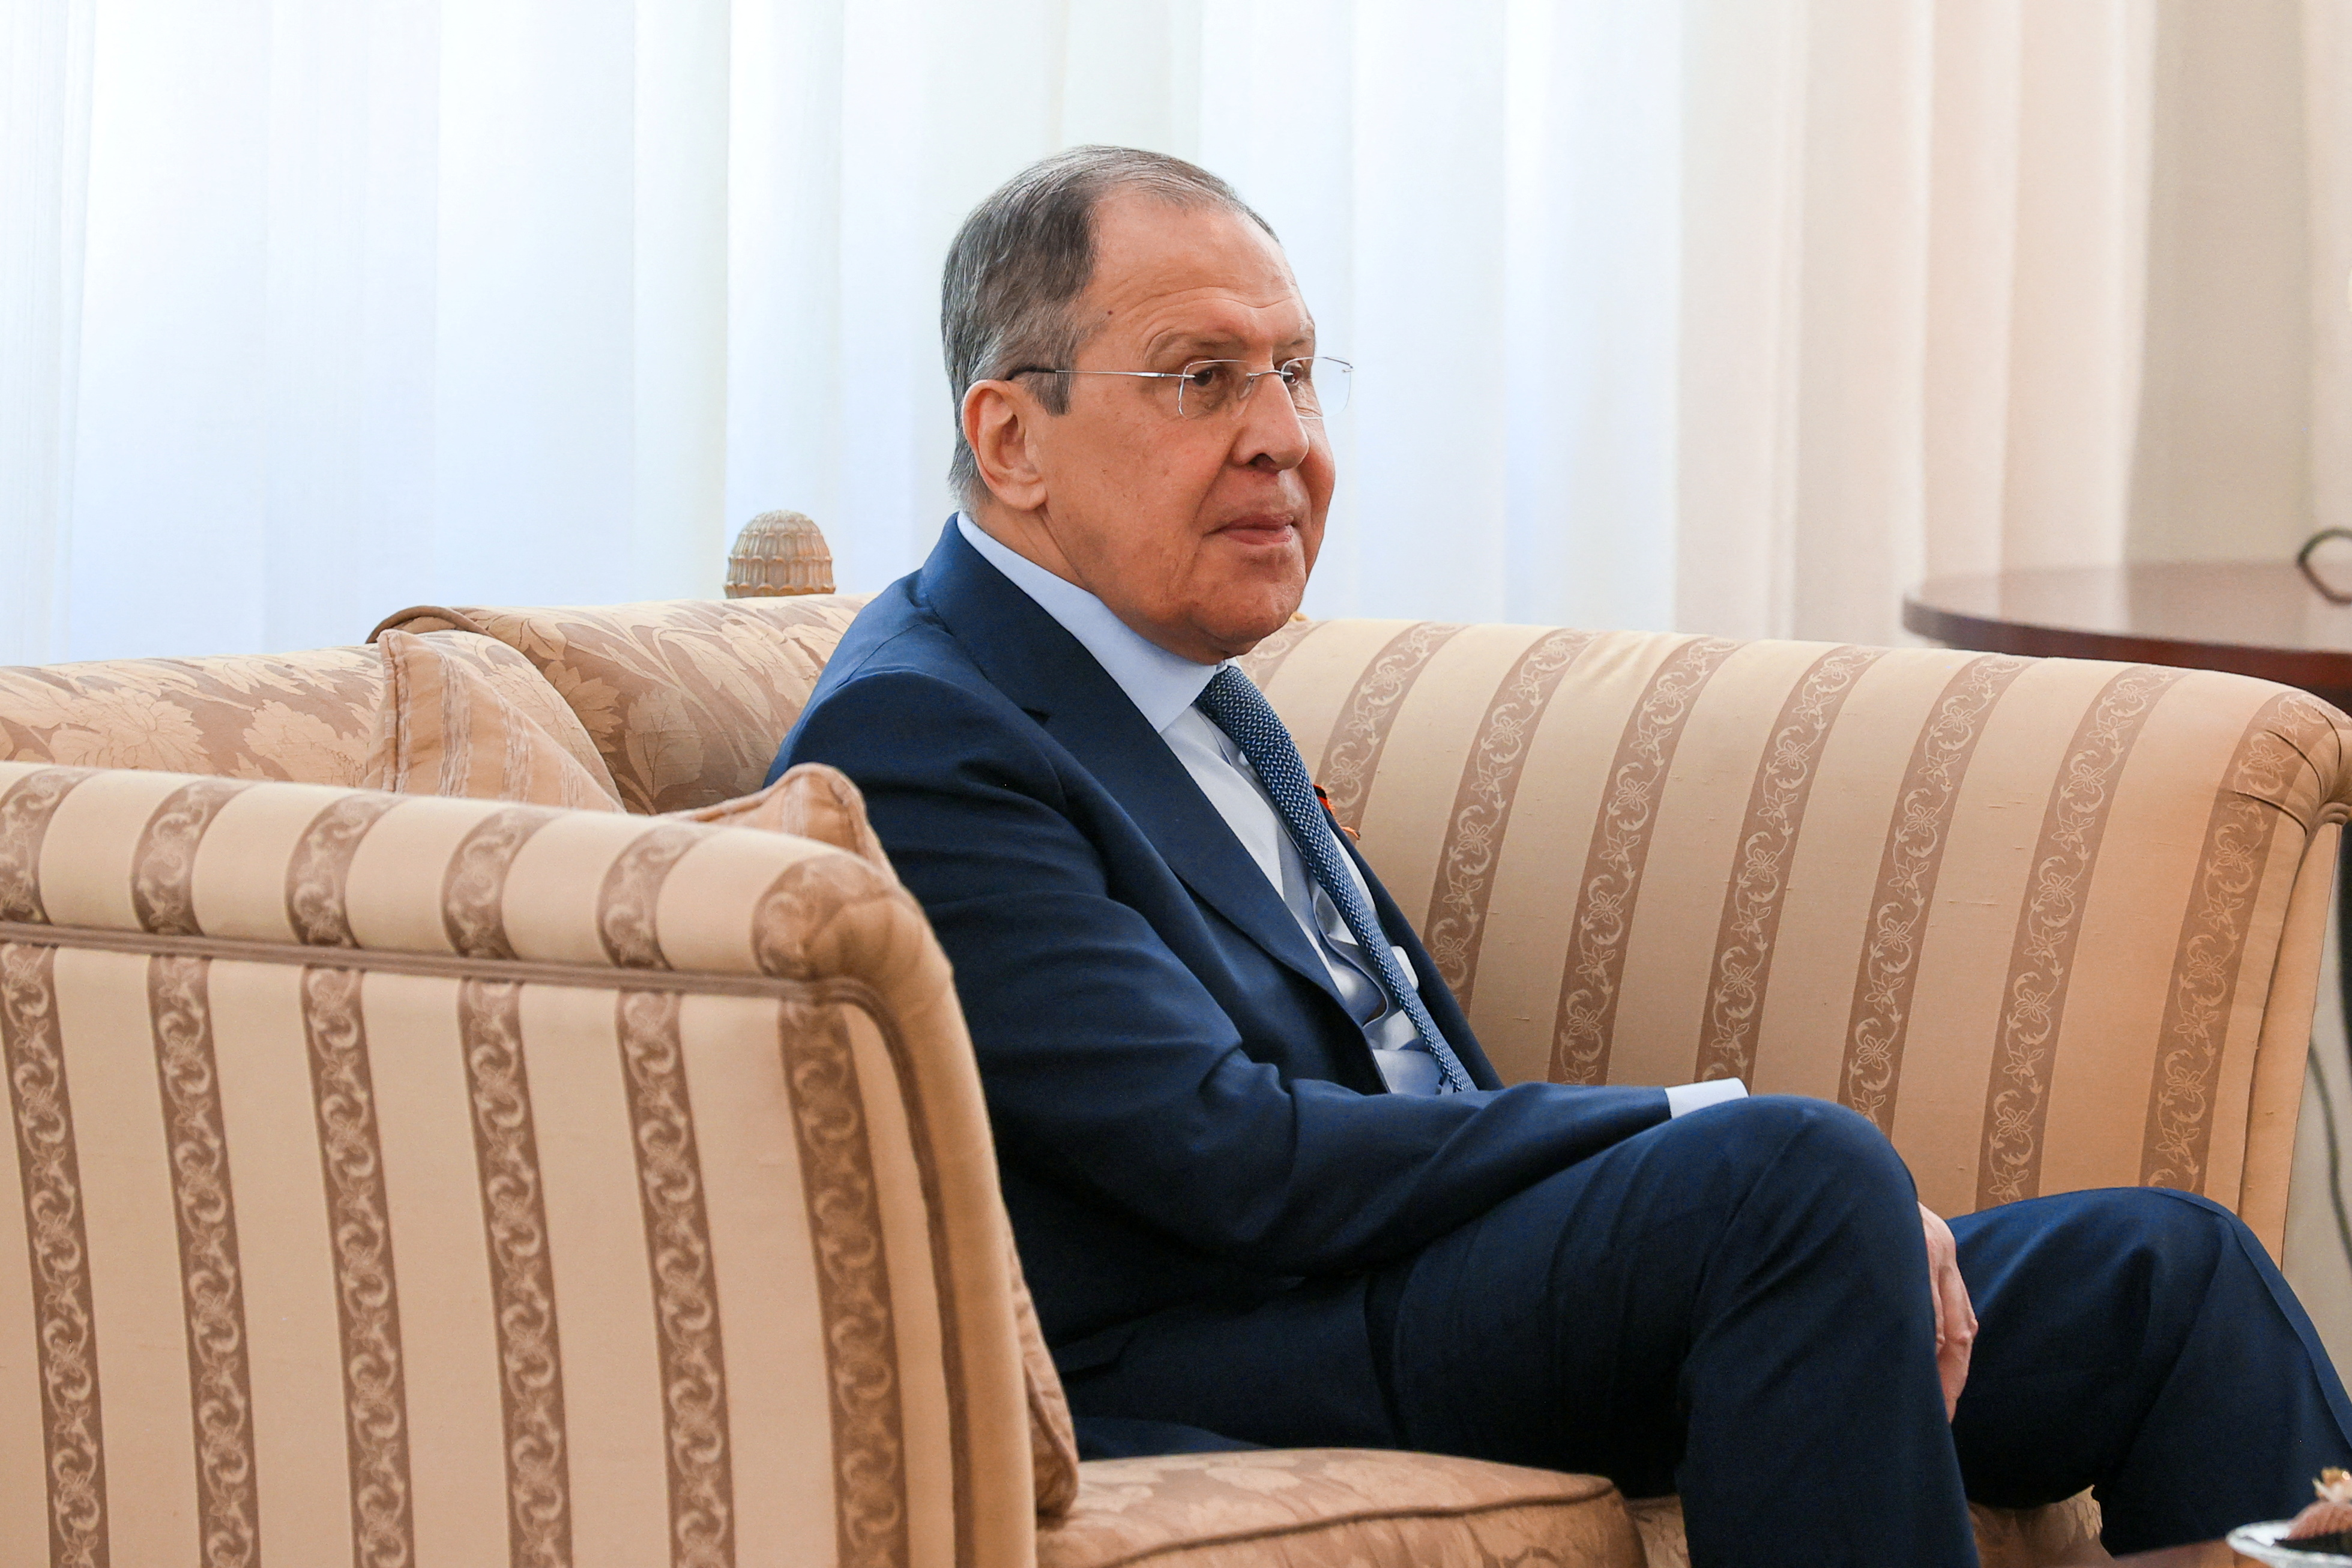 Algerian President Abdelmadjid Tebboune meets with Russian Foreign Minister Sergei Lavrov in Algiers